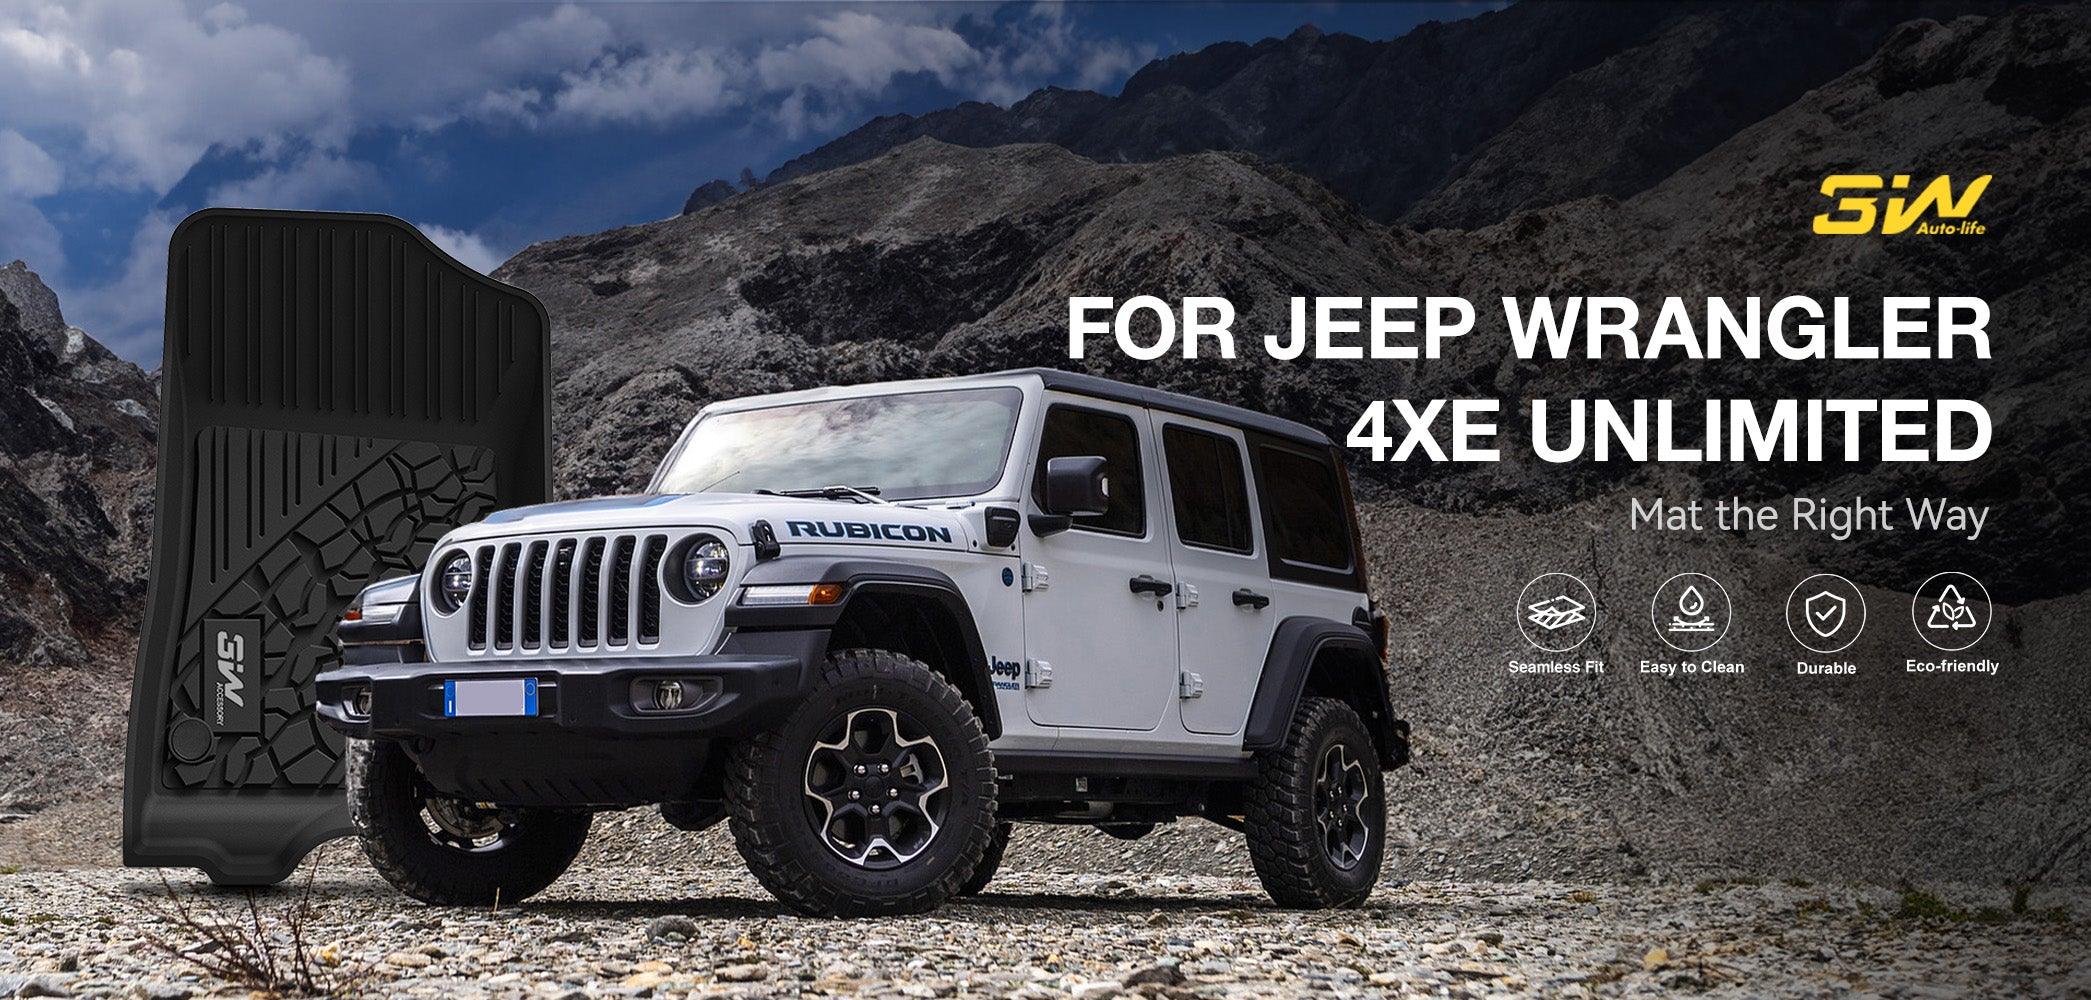 Jeep_Wrangler_4XE_PC_1 - 3Wliners